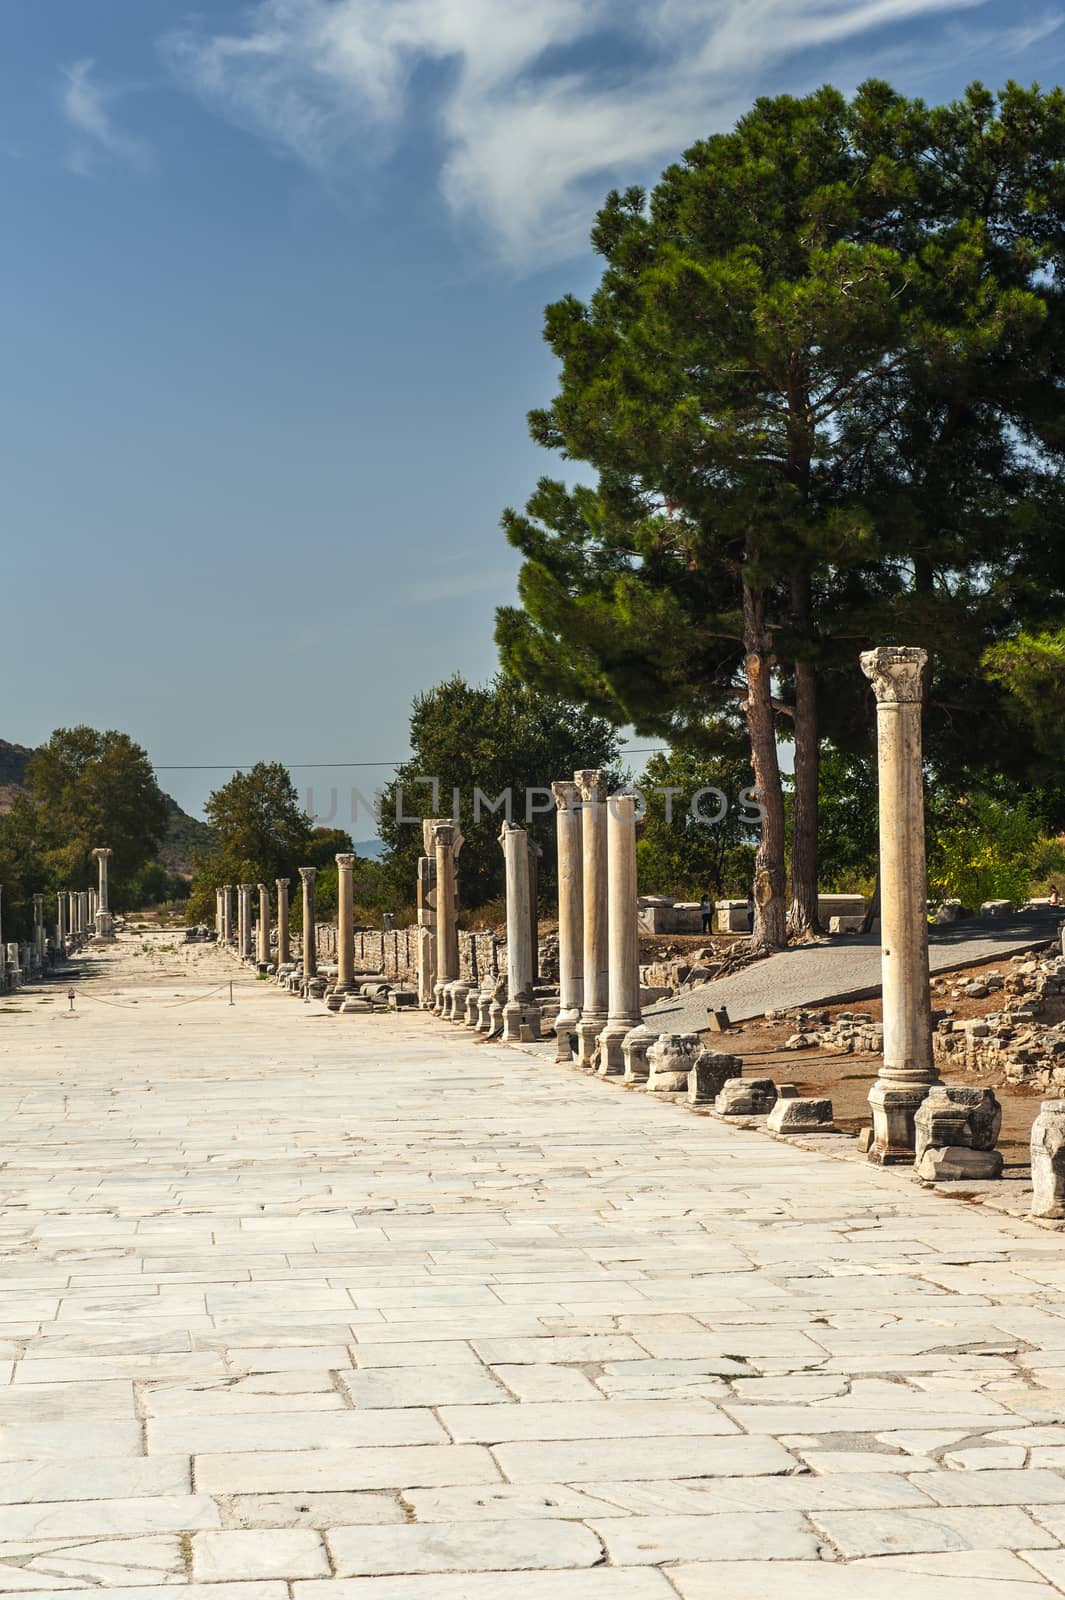 Row of Columns in the ruins of ancient Greek city of Ephesus